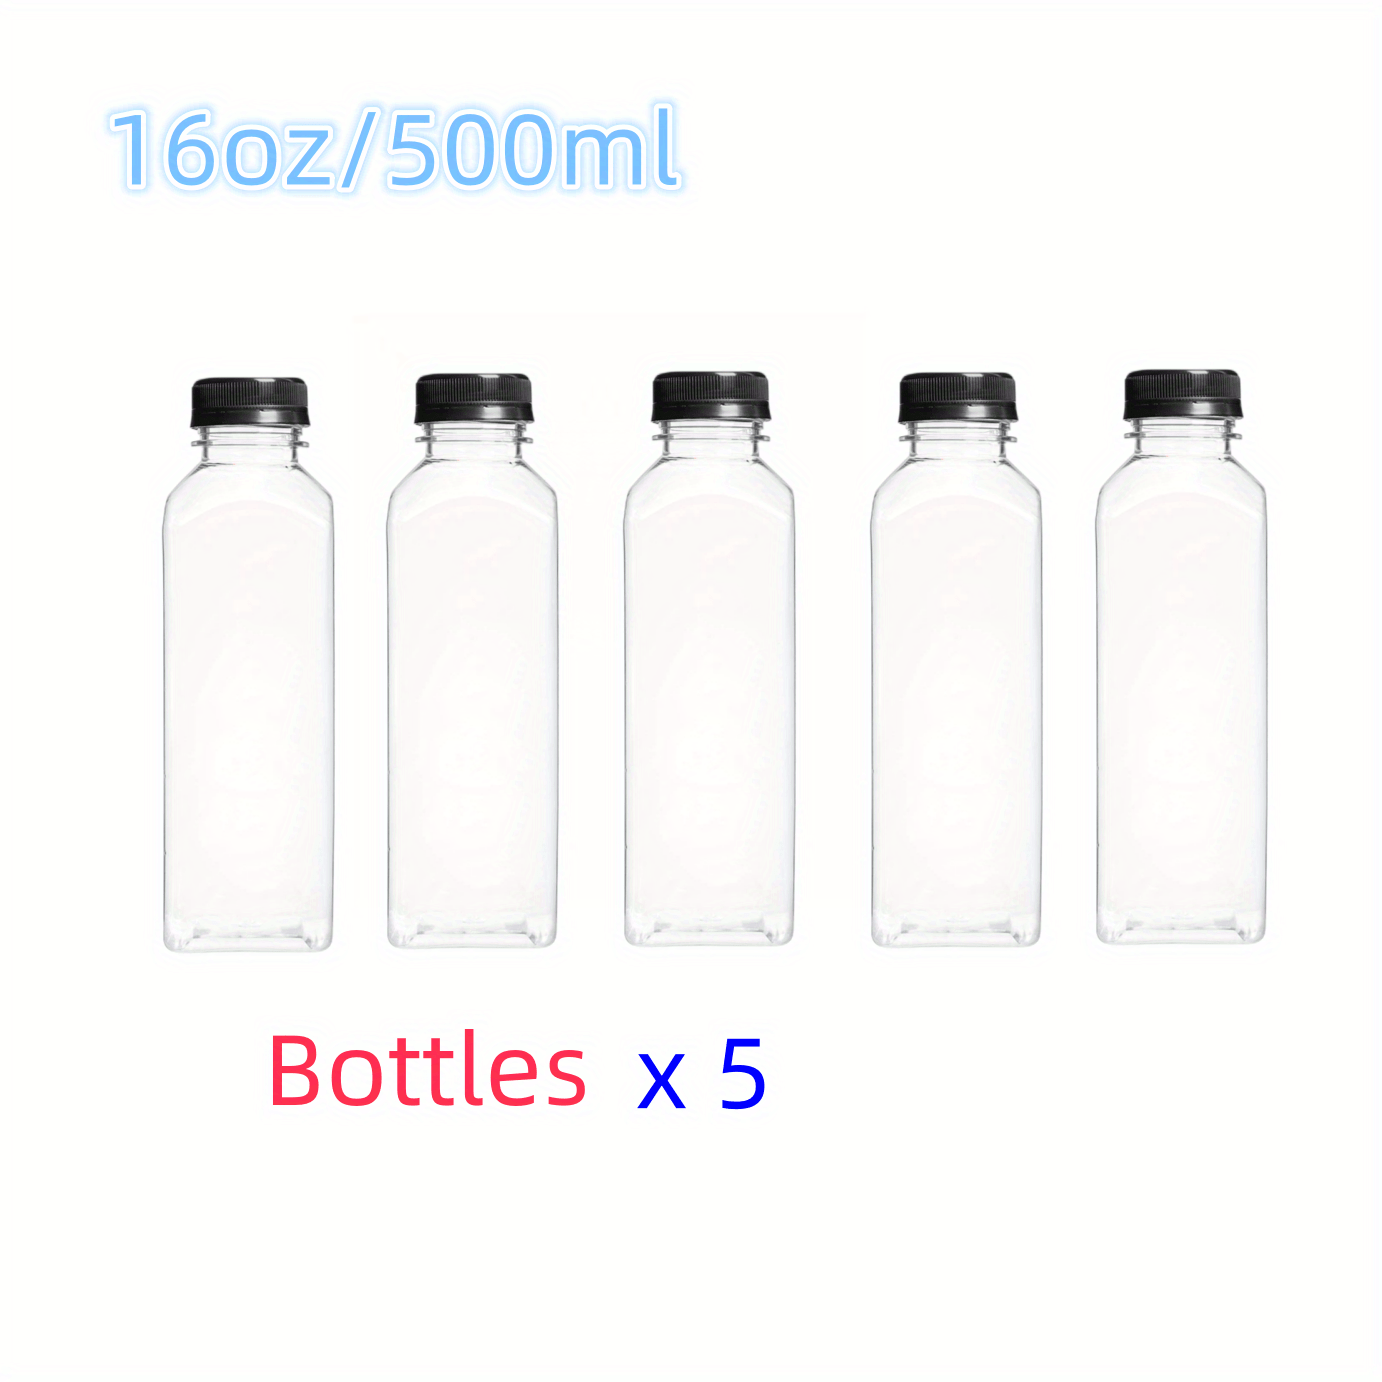 16 oz. Round PET Clear Juice Bottle with Lid